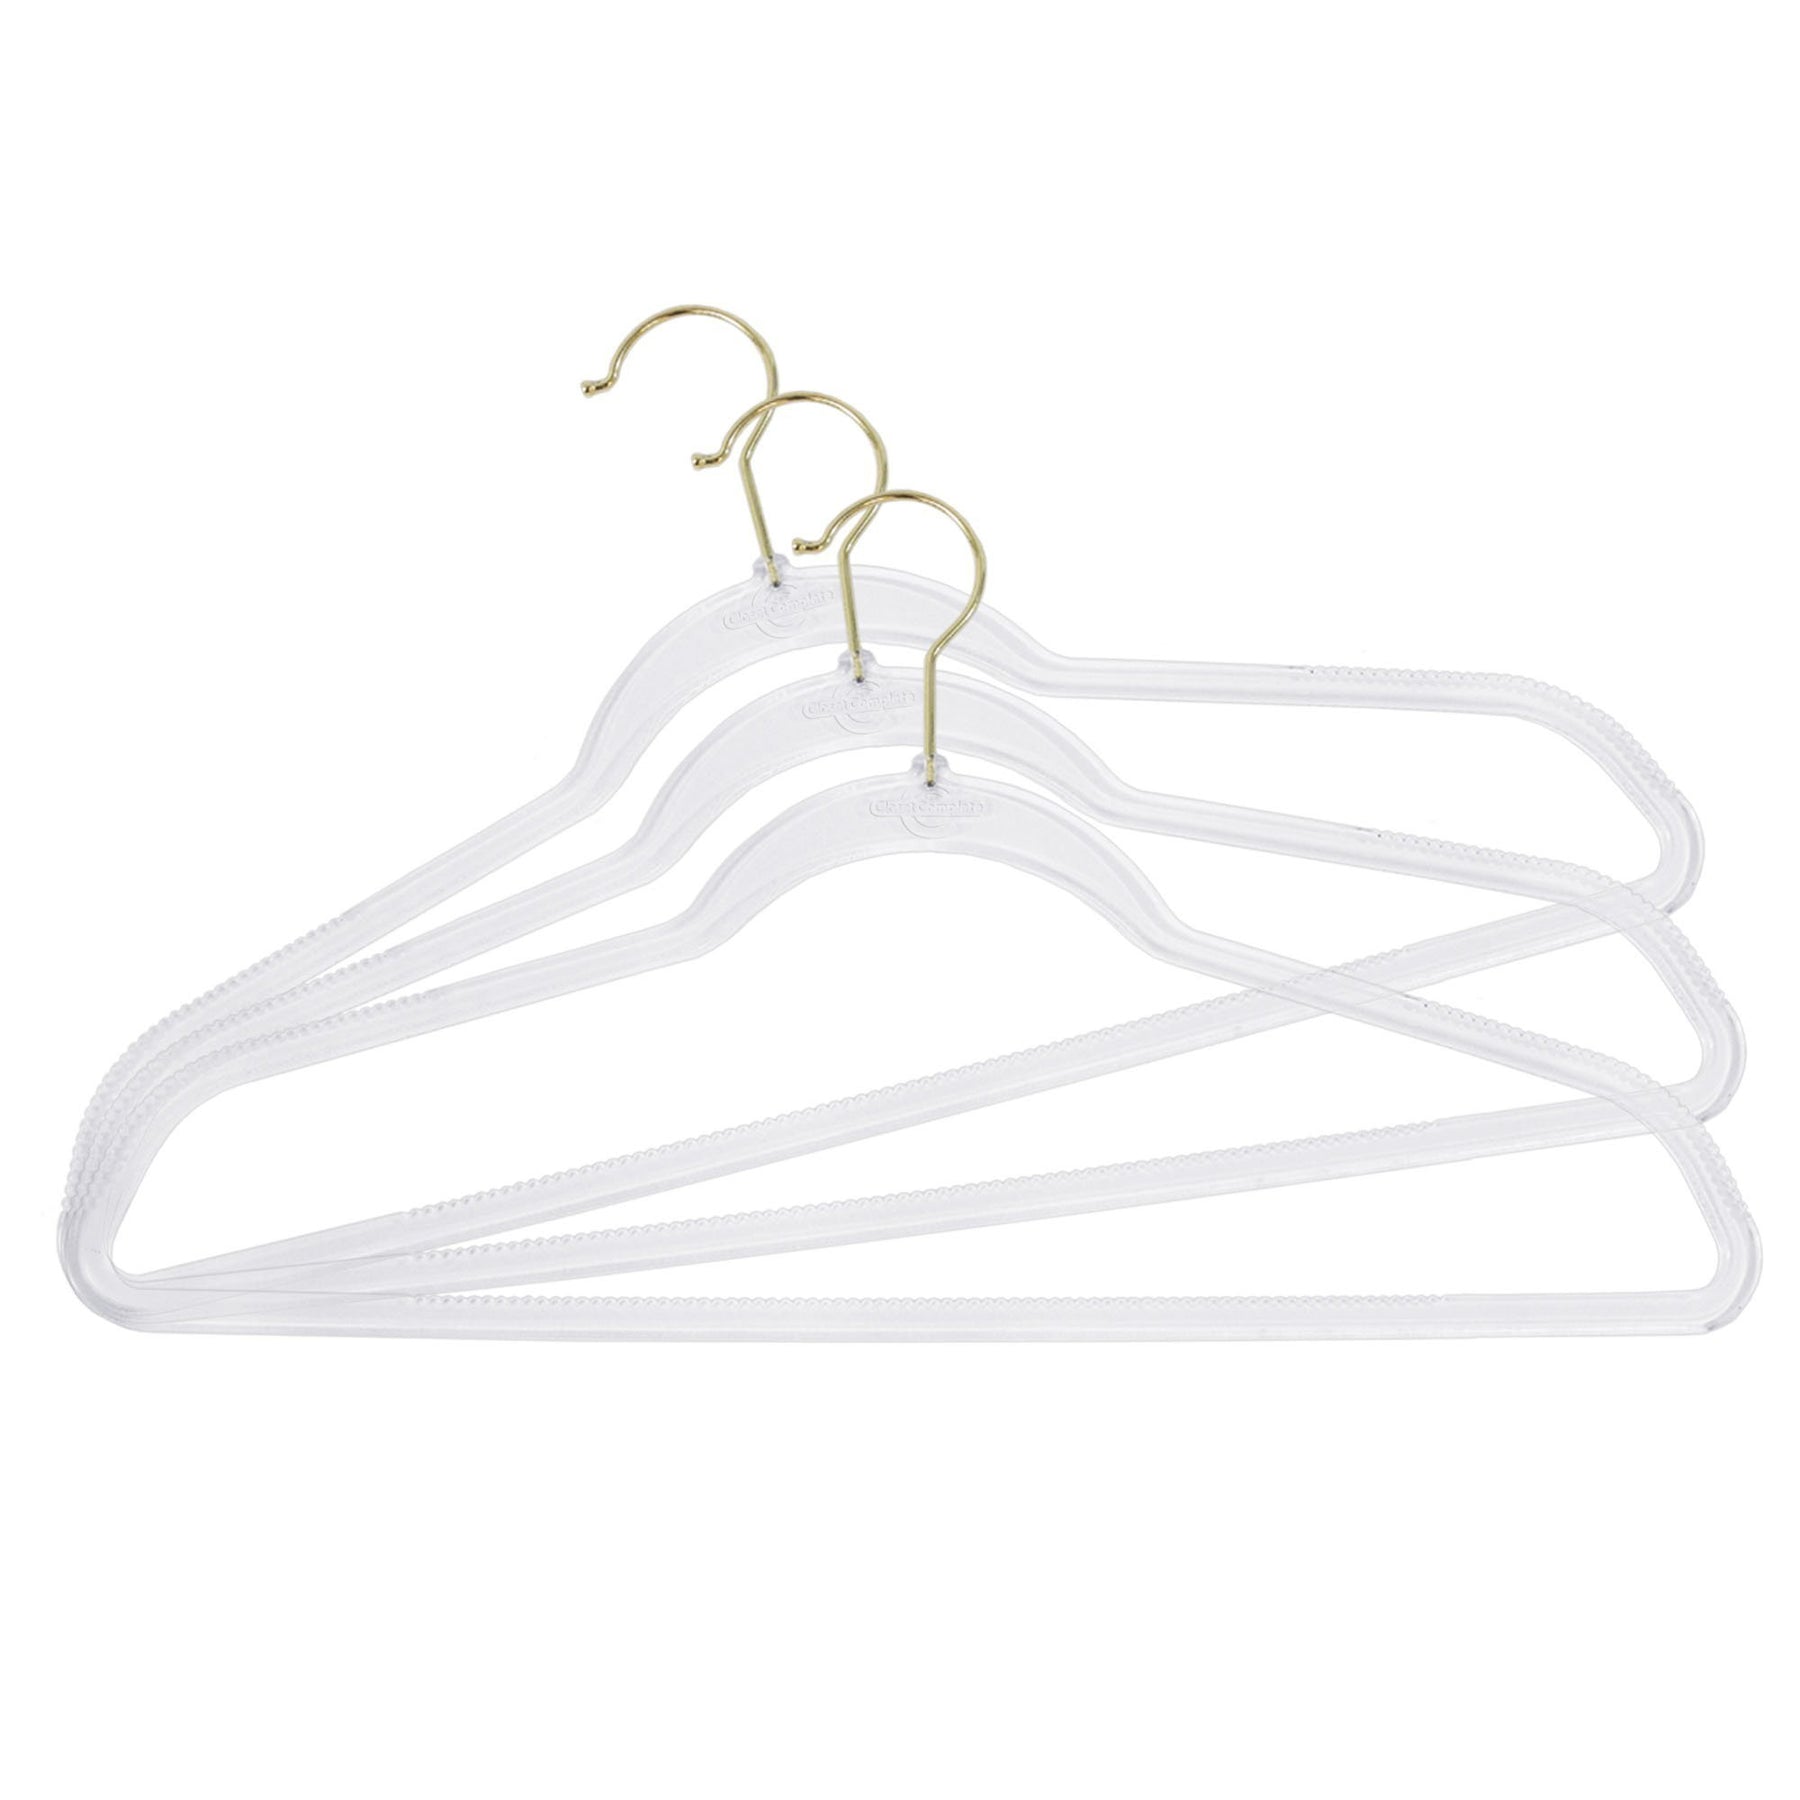 https://cdn.shopify.com/s/files/1/2993/5404/products/closet-complete-acrylic-hangers-completely-clear-non-slip-invisible-acrylic-hangers-69194s-7162747519061_1800x1800.jpg?v=1552517801